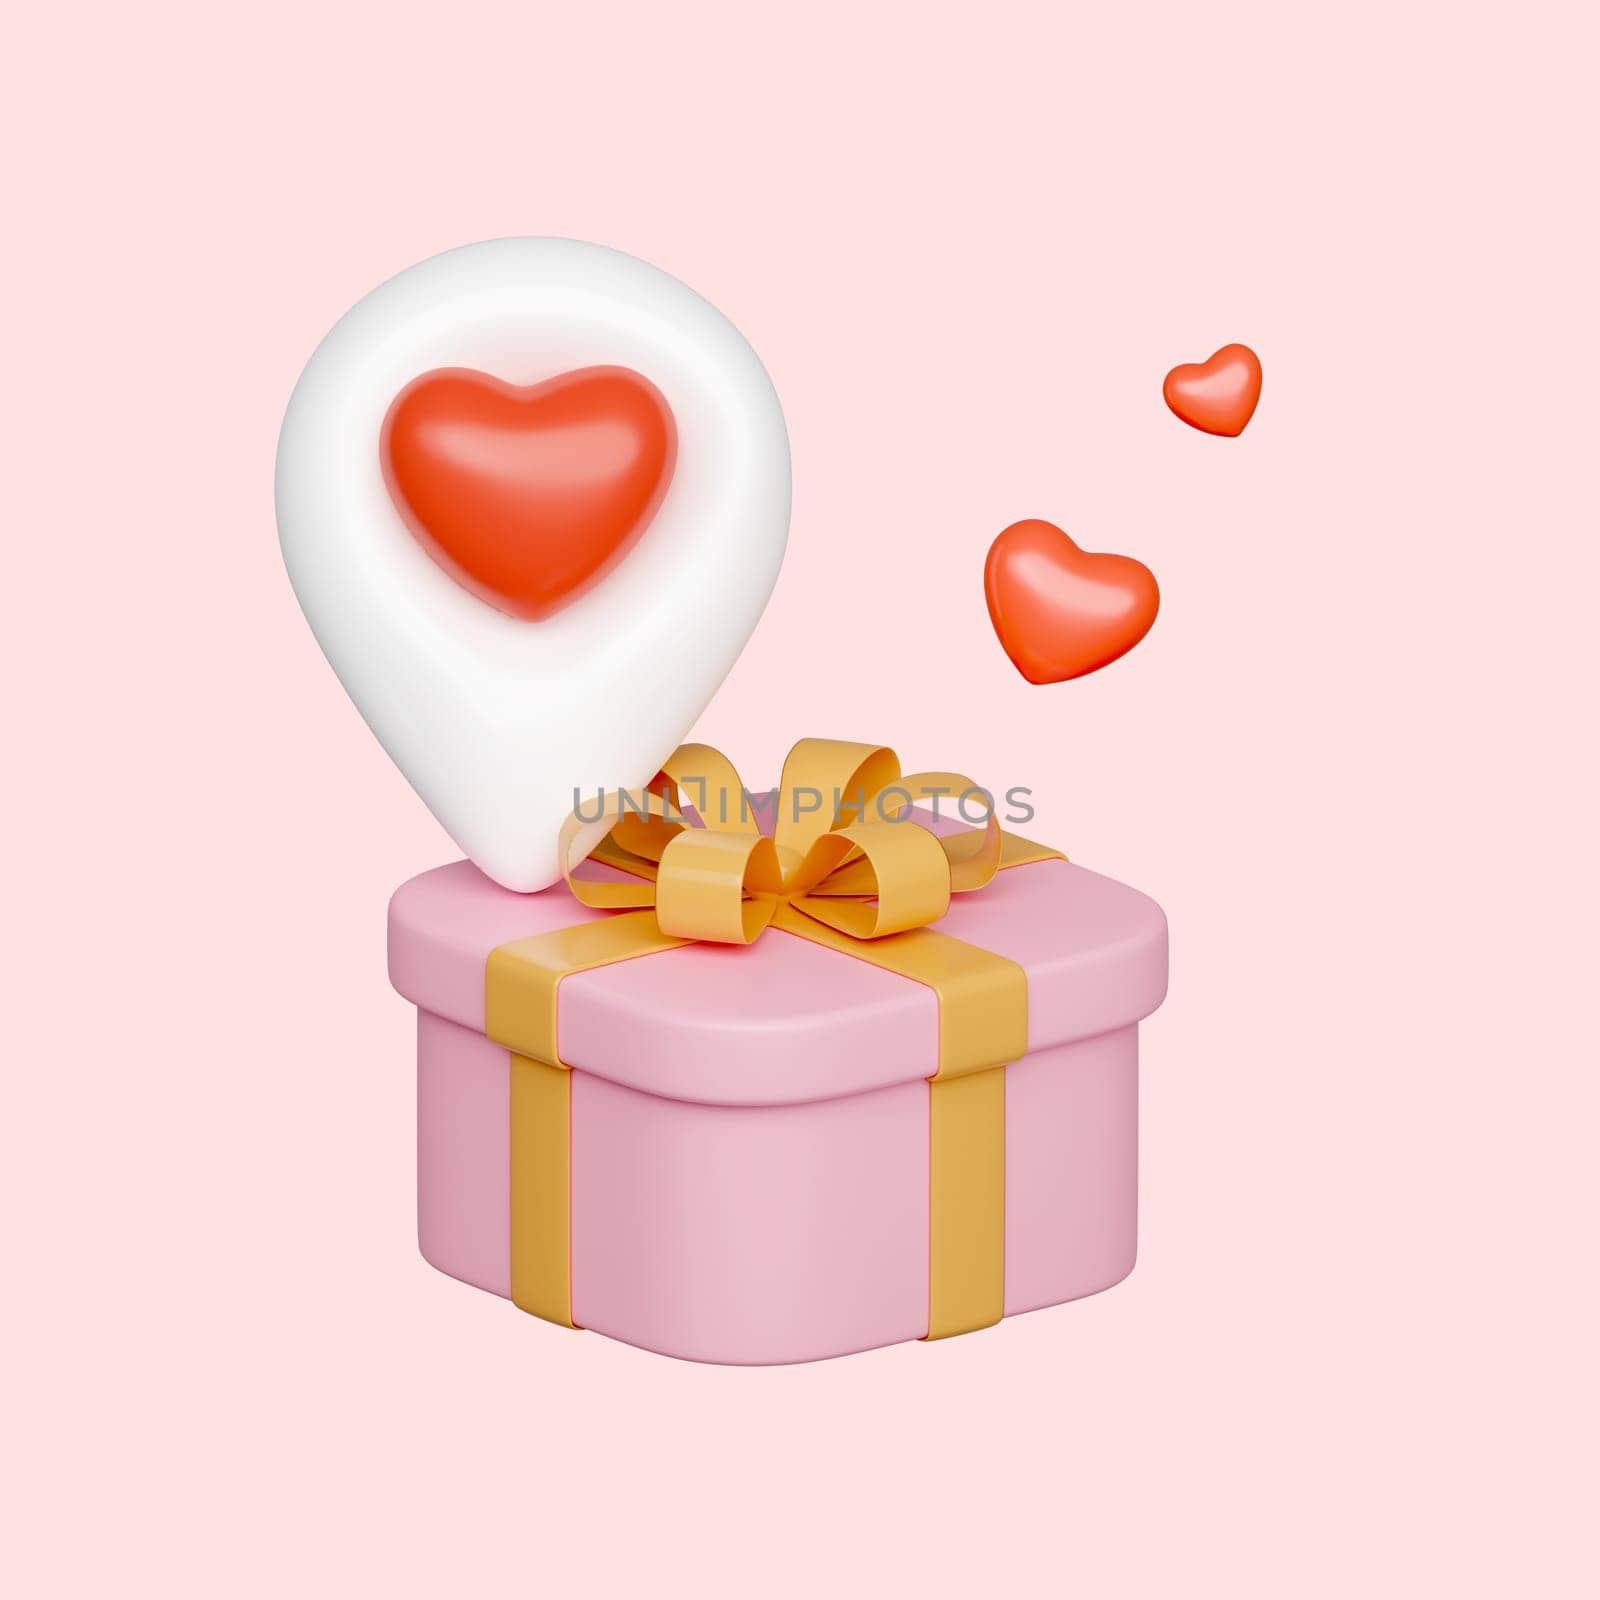 3D gift box balloon heart group floating love valentine concept isolated on pink background with clipping path. 3d rendering illustration by meepiangraphic